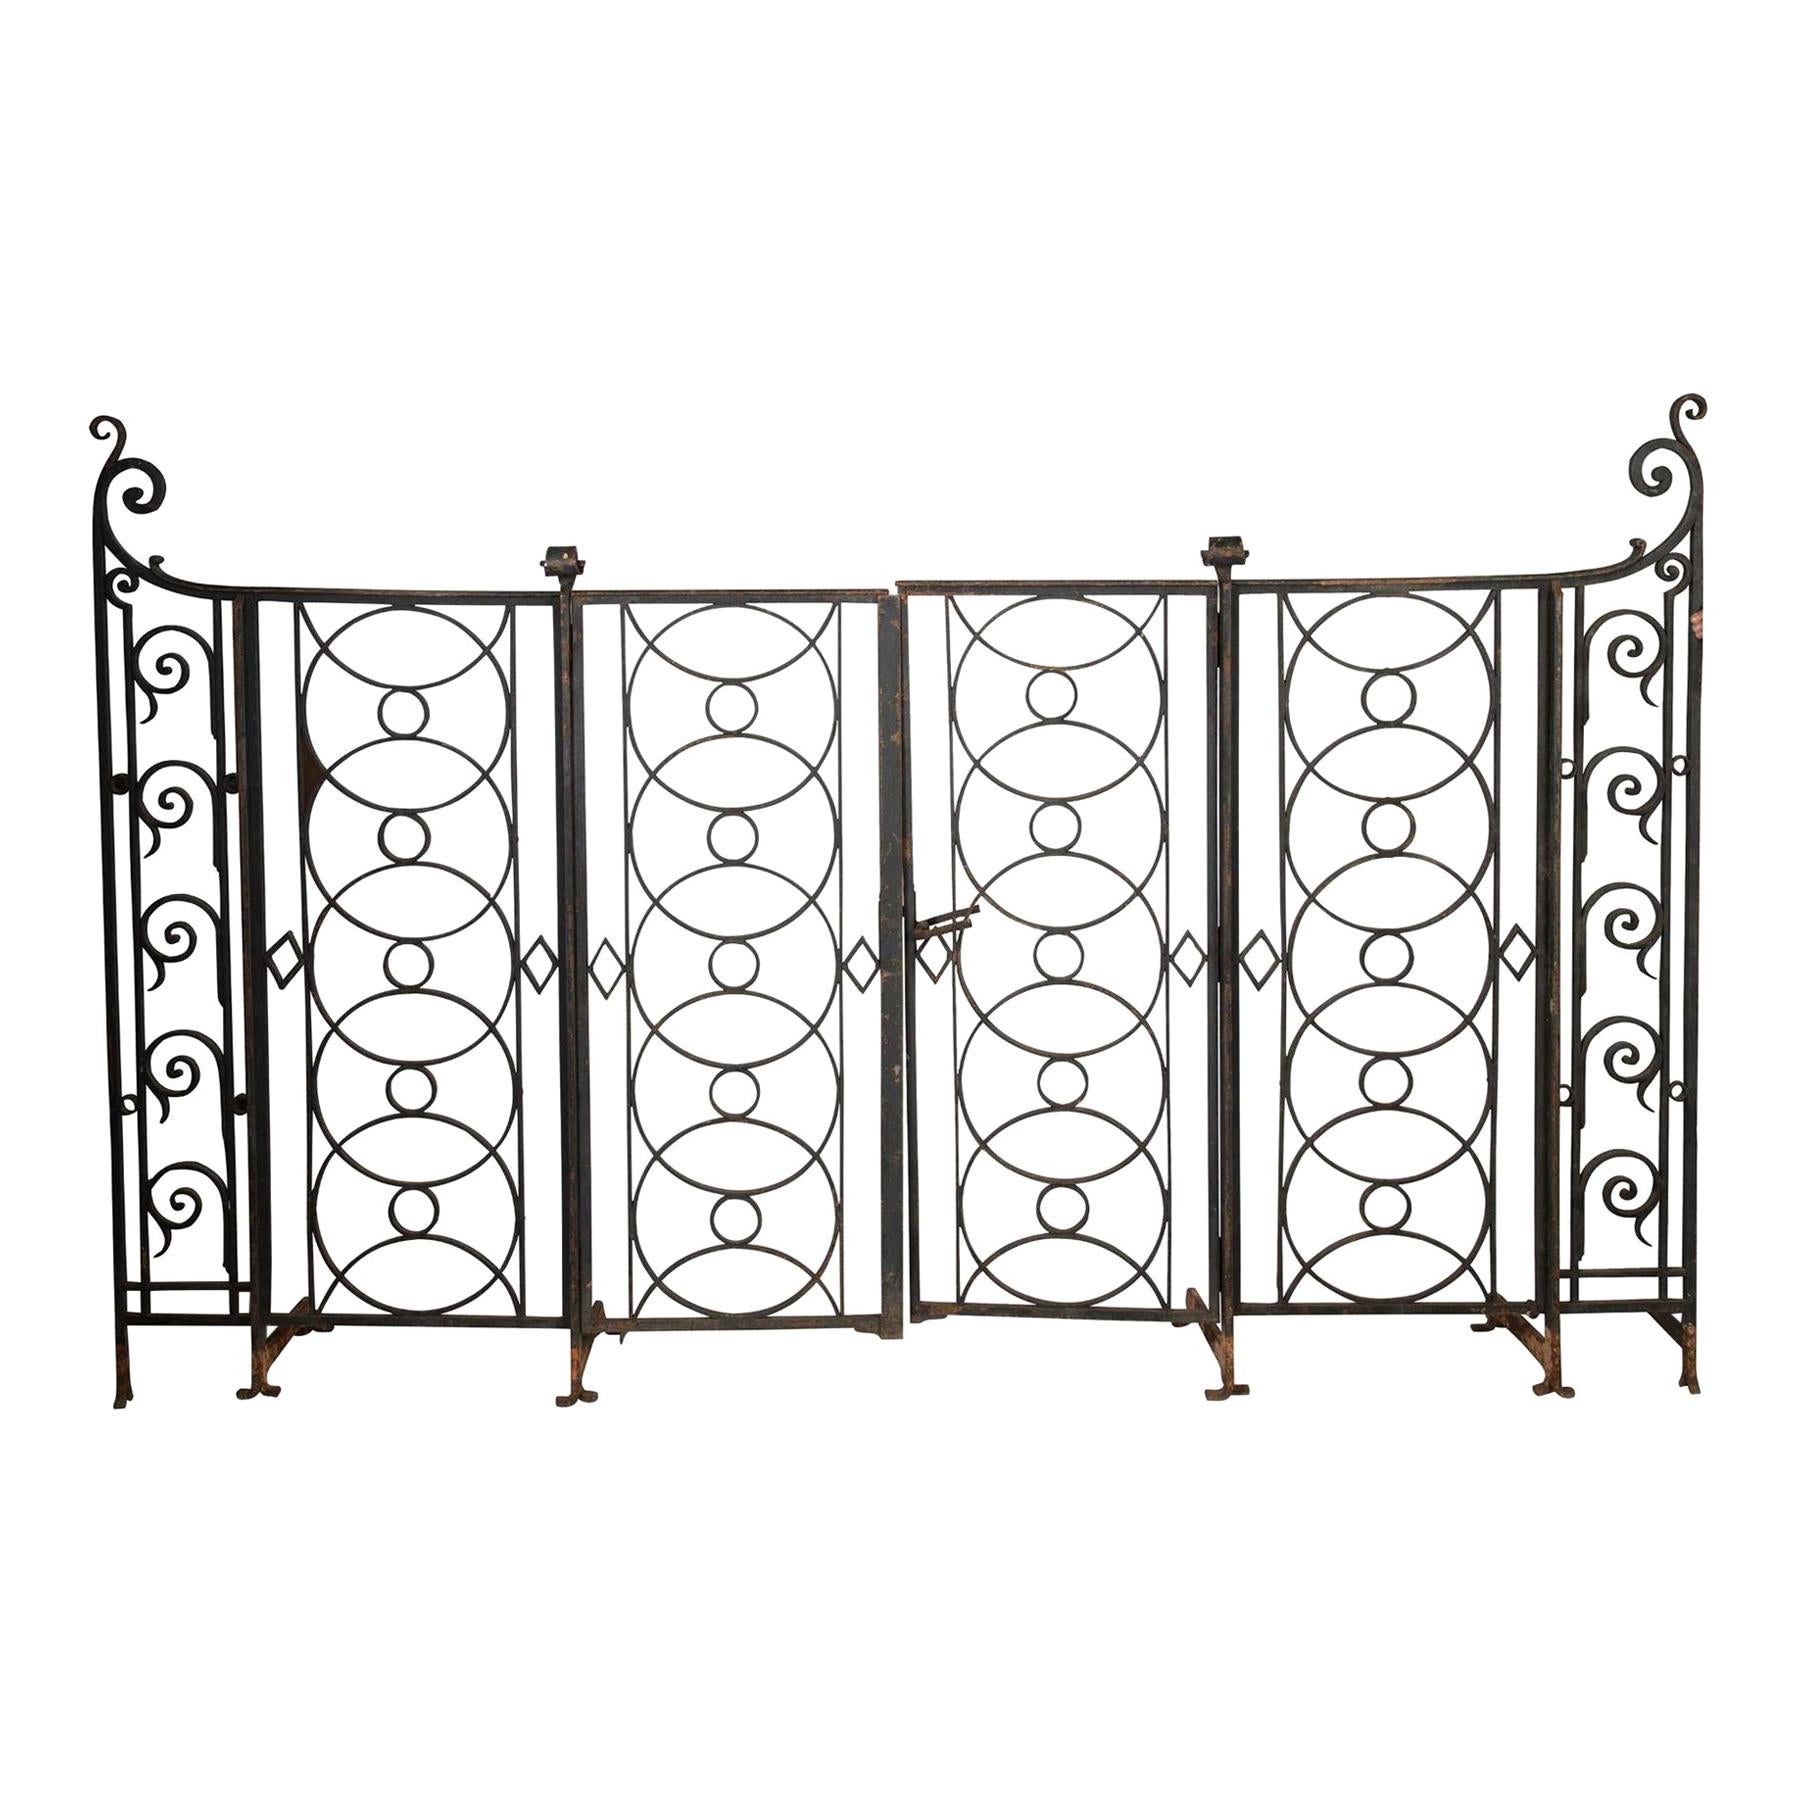 Pair of French Iron Gates, Early 20th Century